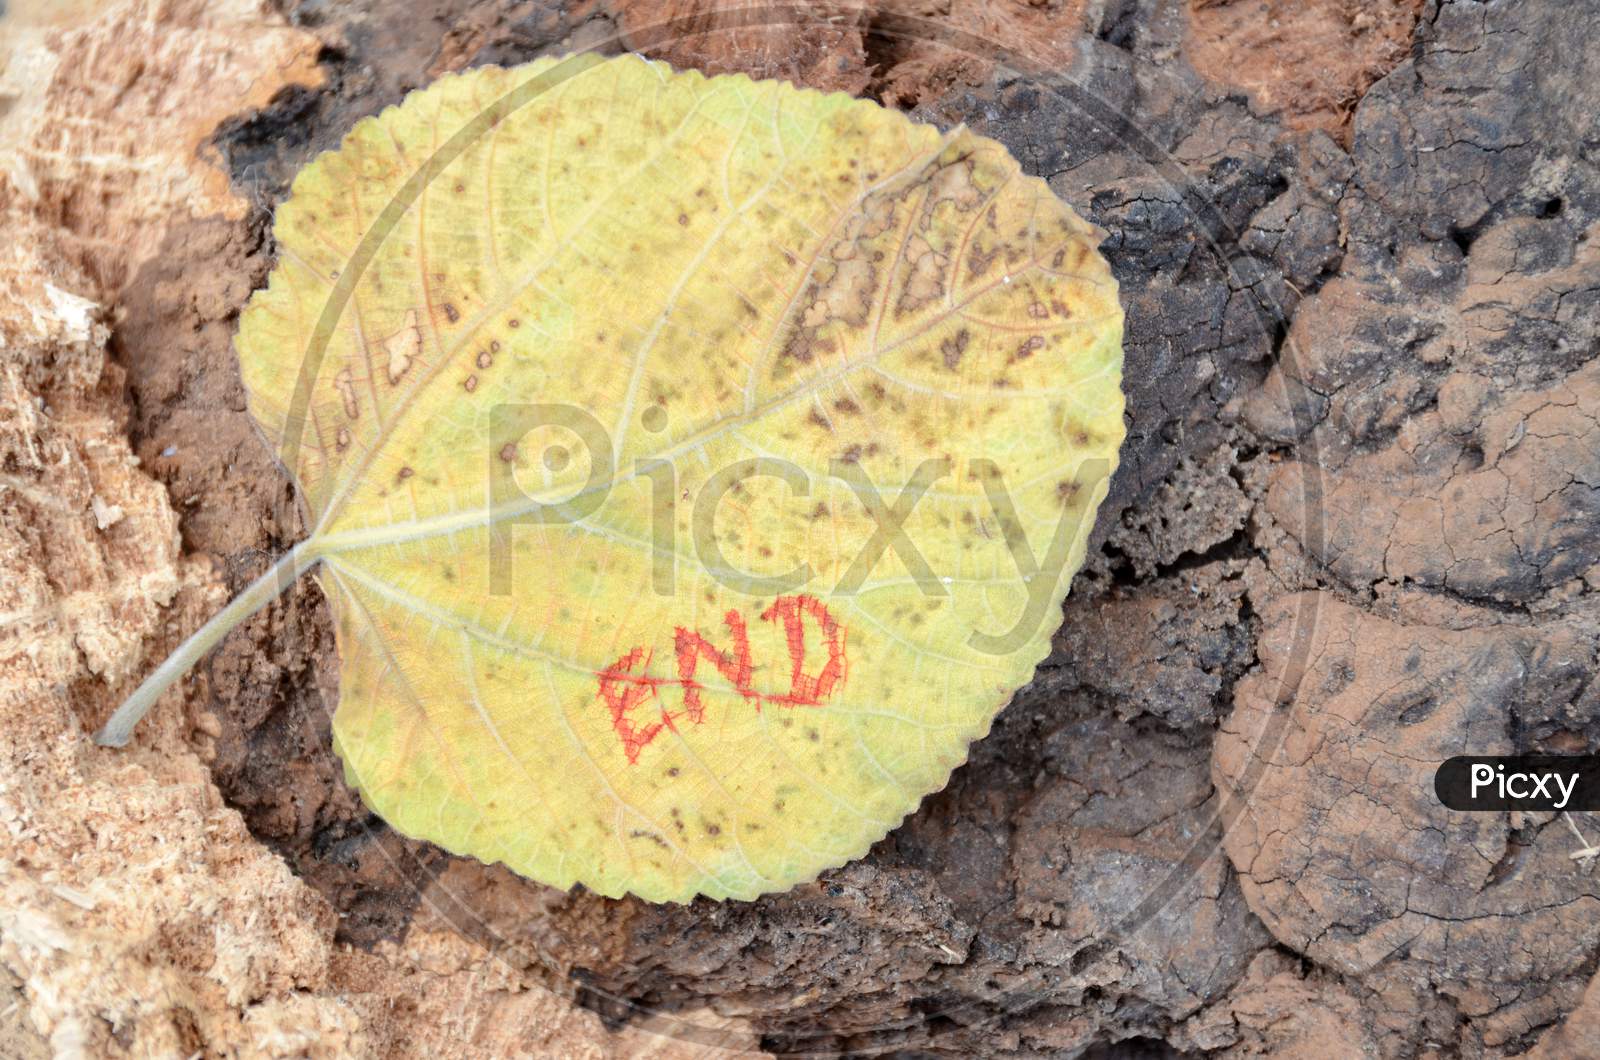 The Yellow Drilled Blue Berry Leaf Write The End Mental Health Awareness Concept On The Wooden Brown Background.